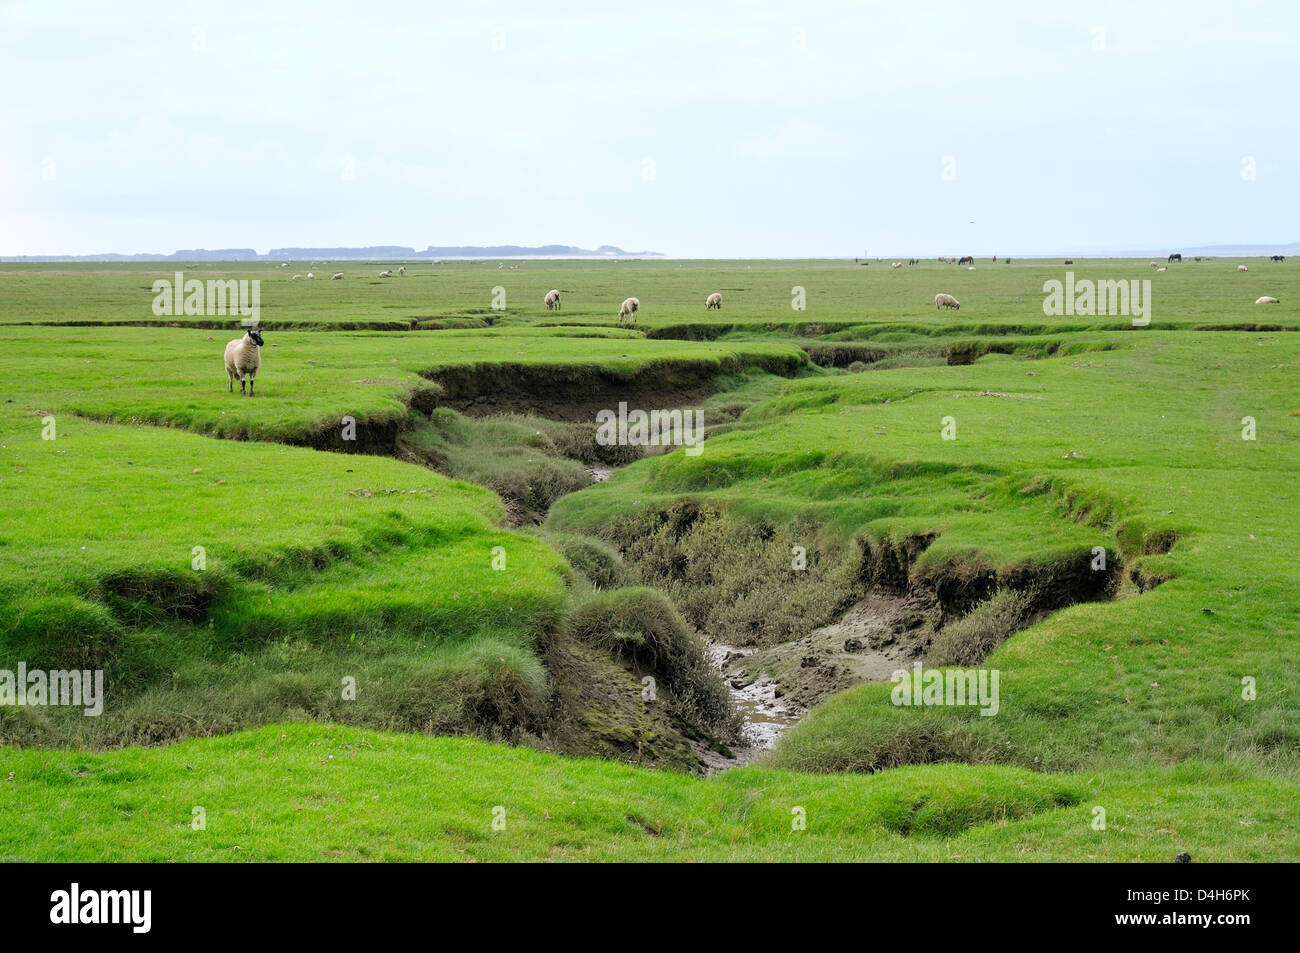 Sheep (Ovis aries) grazing Llanrhidian salt marshes by tidal creeks, The Gower Peninsula, Wales, UK Stock Photo